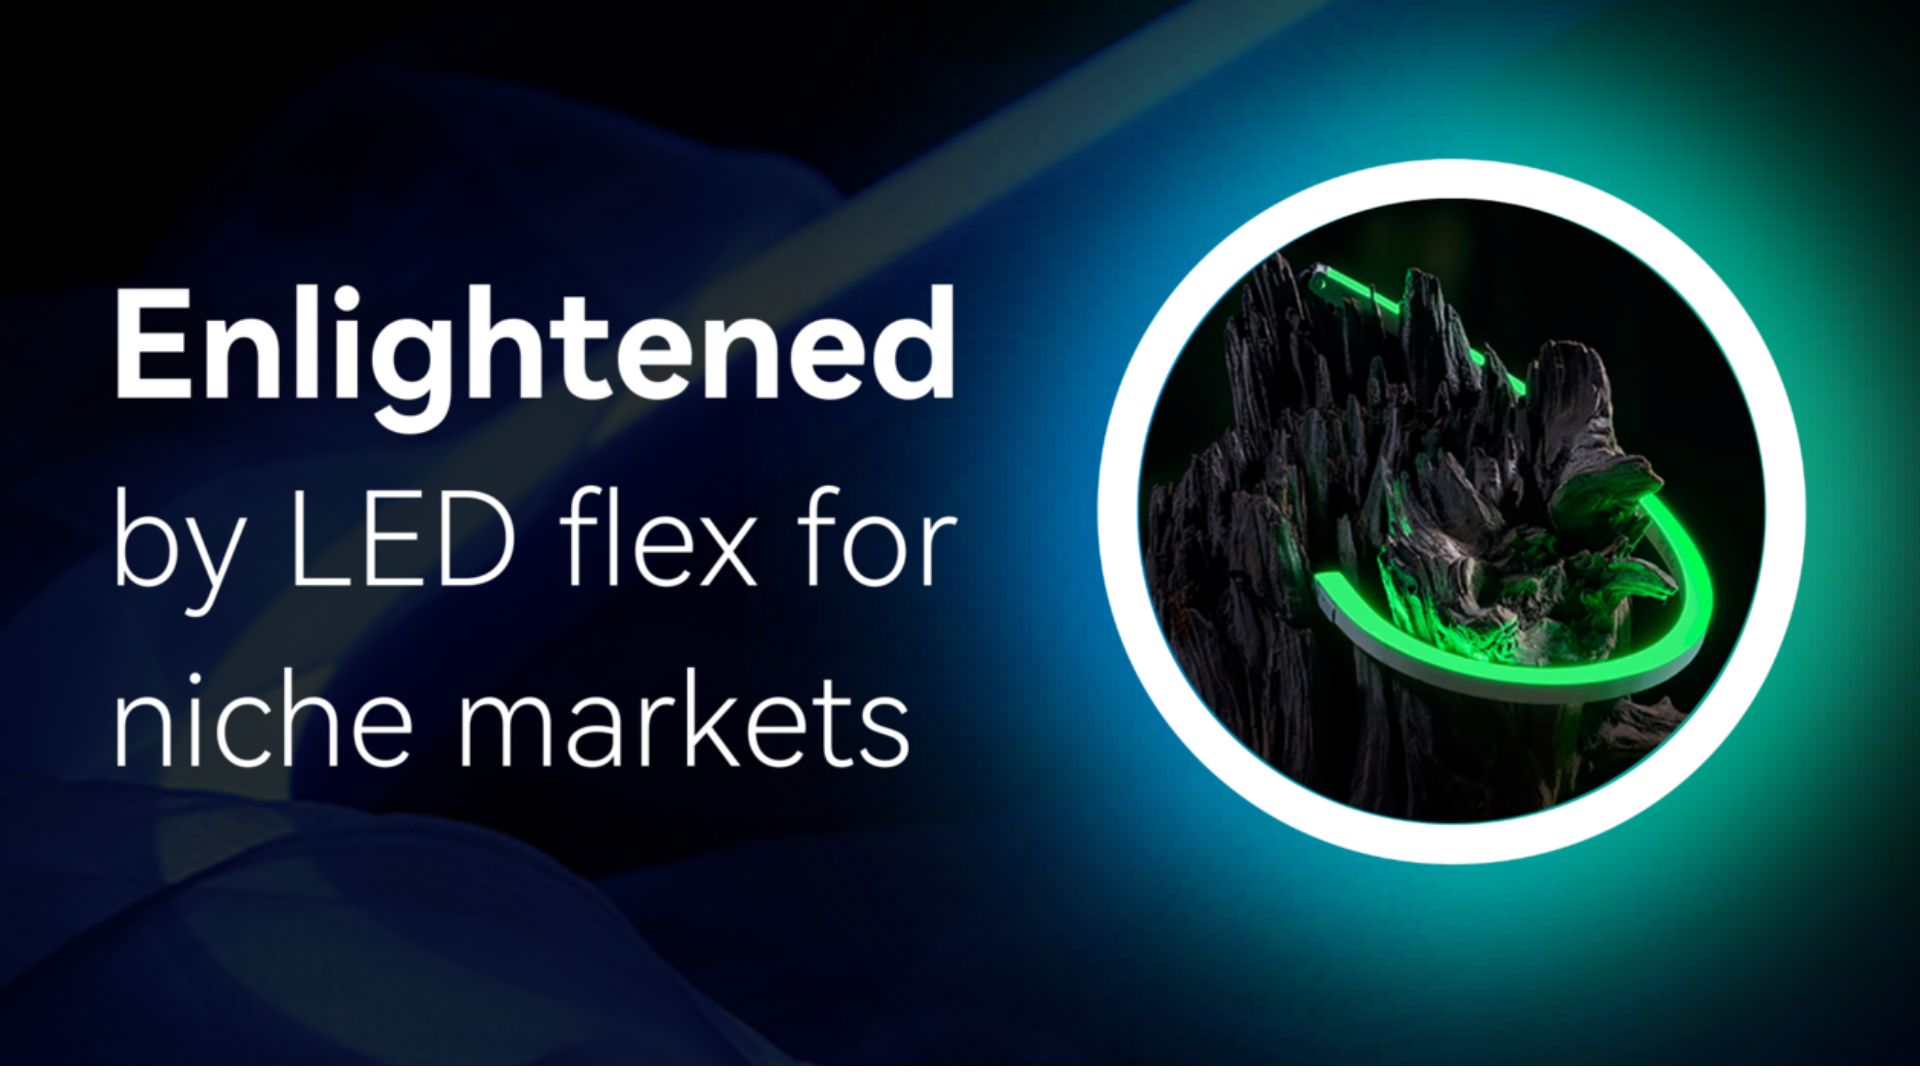 How LED Flex Inspires in Niche Markets